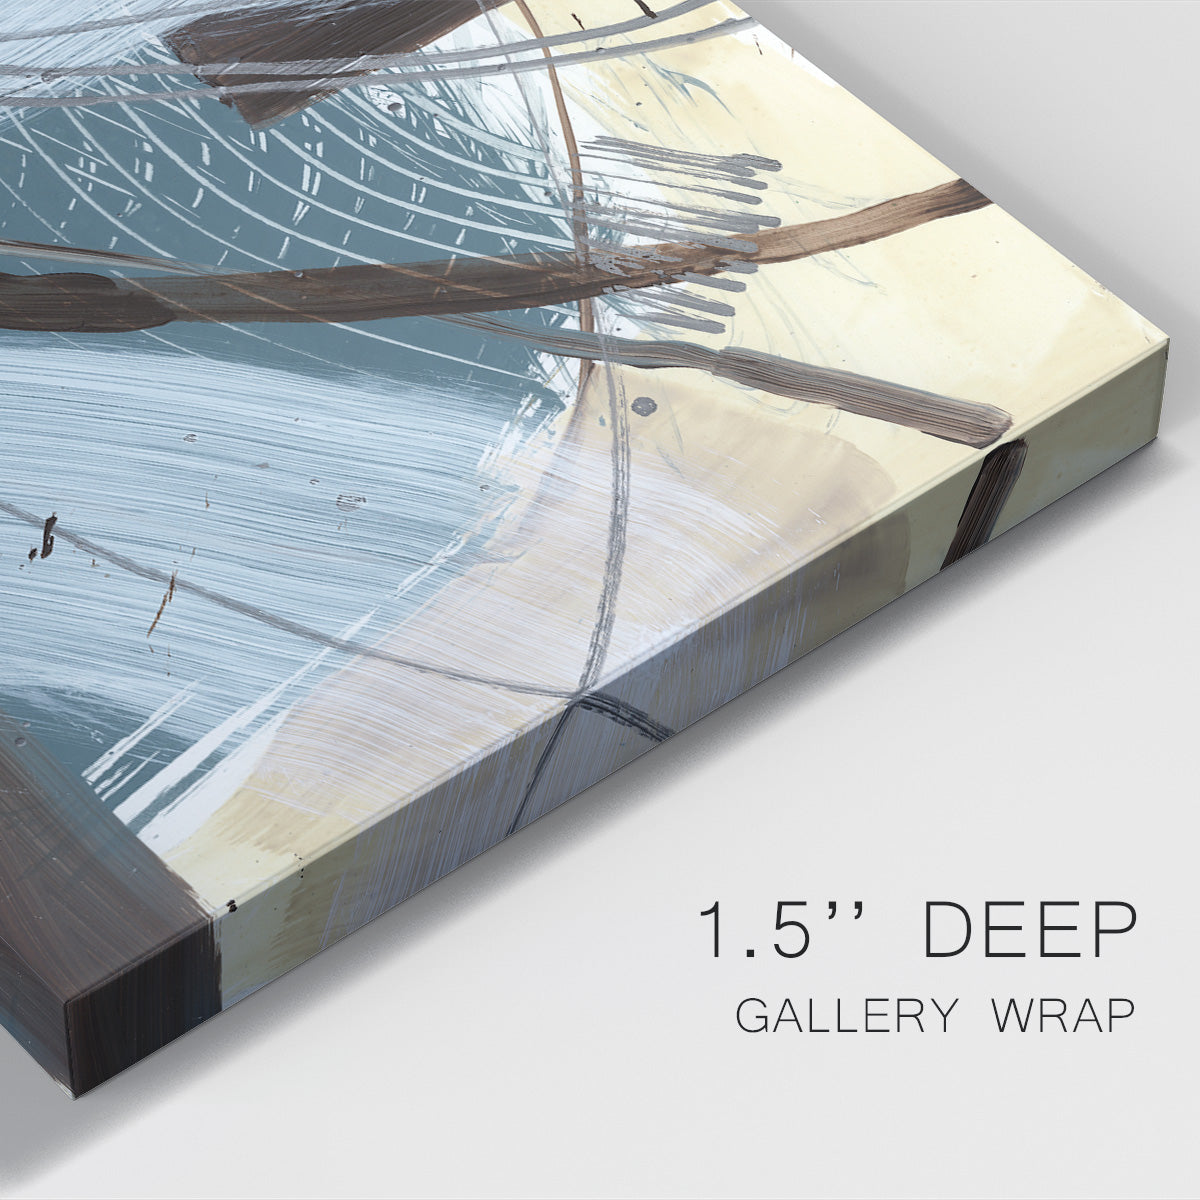 Winding Around II Premium Gallery Wrapped Canvas - Ready to Hang